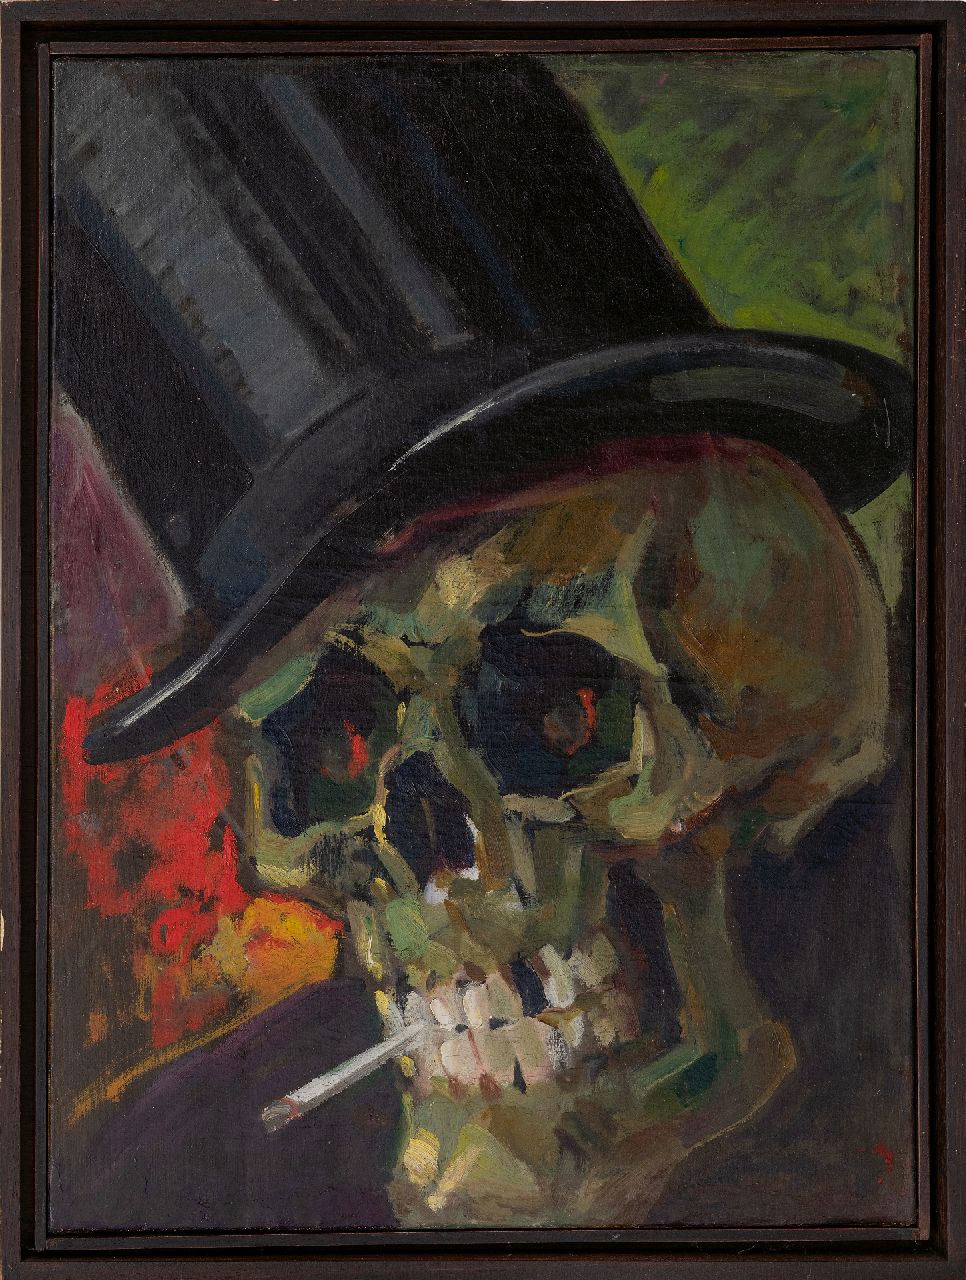 Hollandse School, ca. 1900   | Hollandse School, ca. 1900 | Paintings offered for sale | Skull with  cigarette and top-hat (memento mori), oil on canvas 59.9 x 44.8 cm, gesigneerd Ch. Brees and 1892